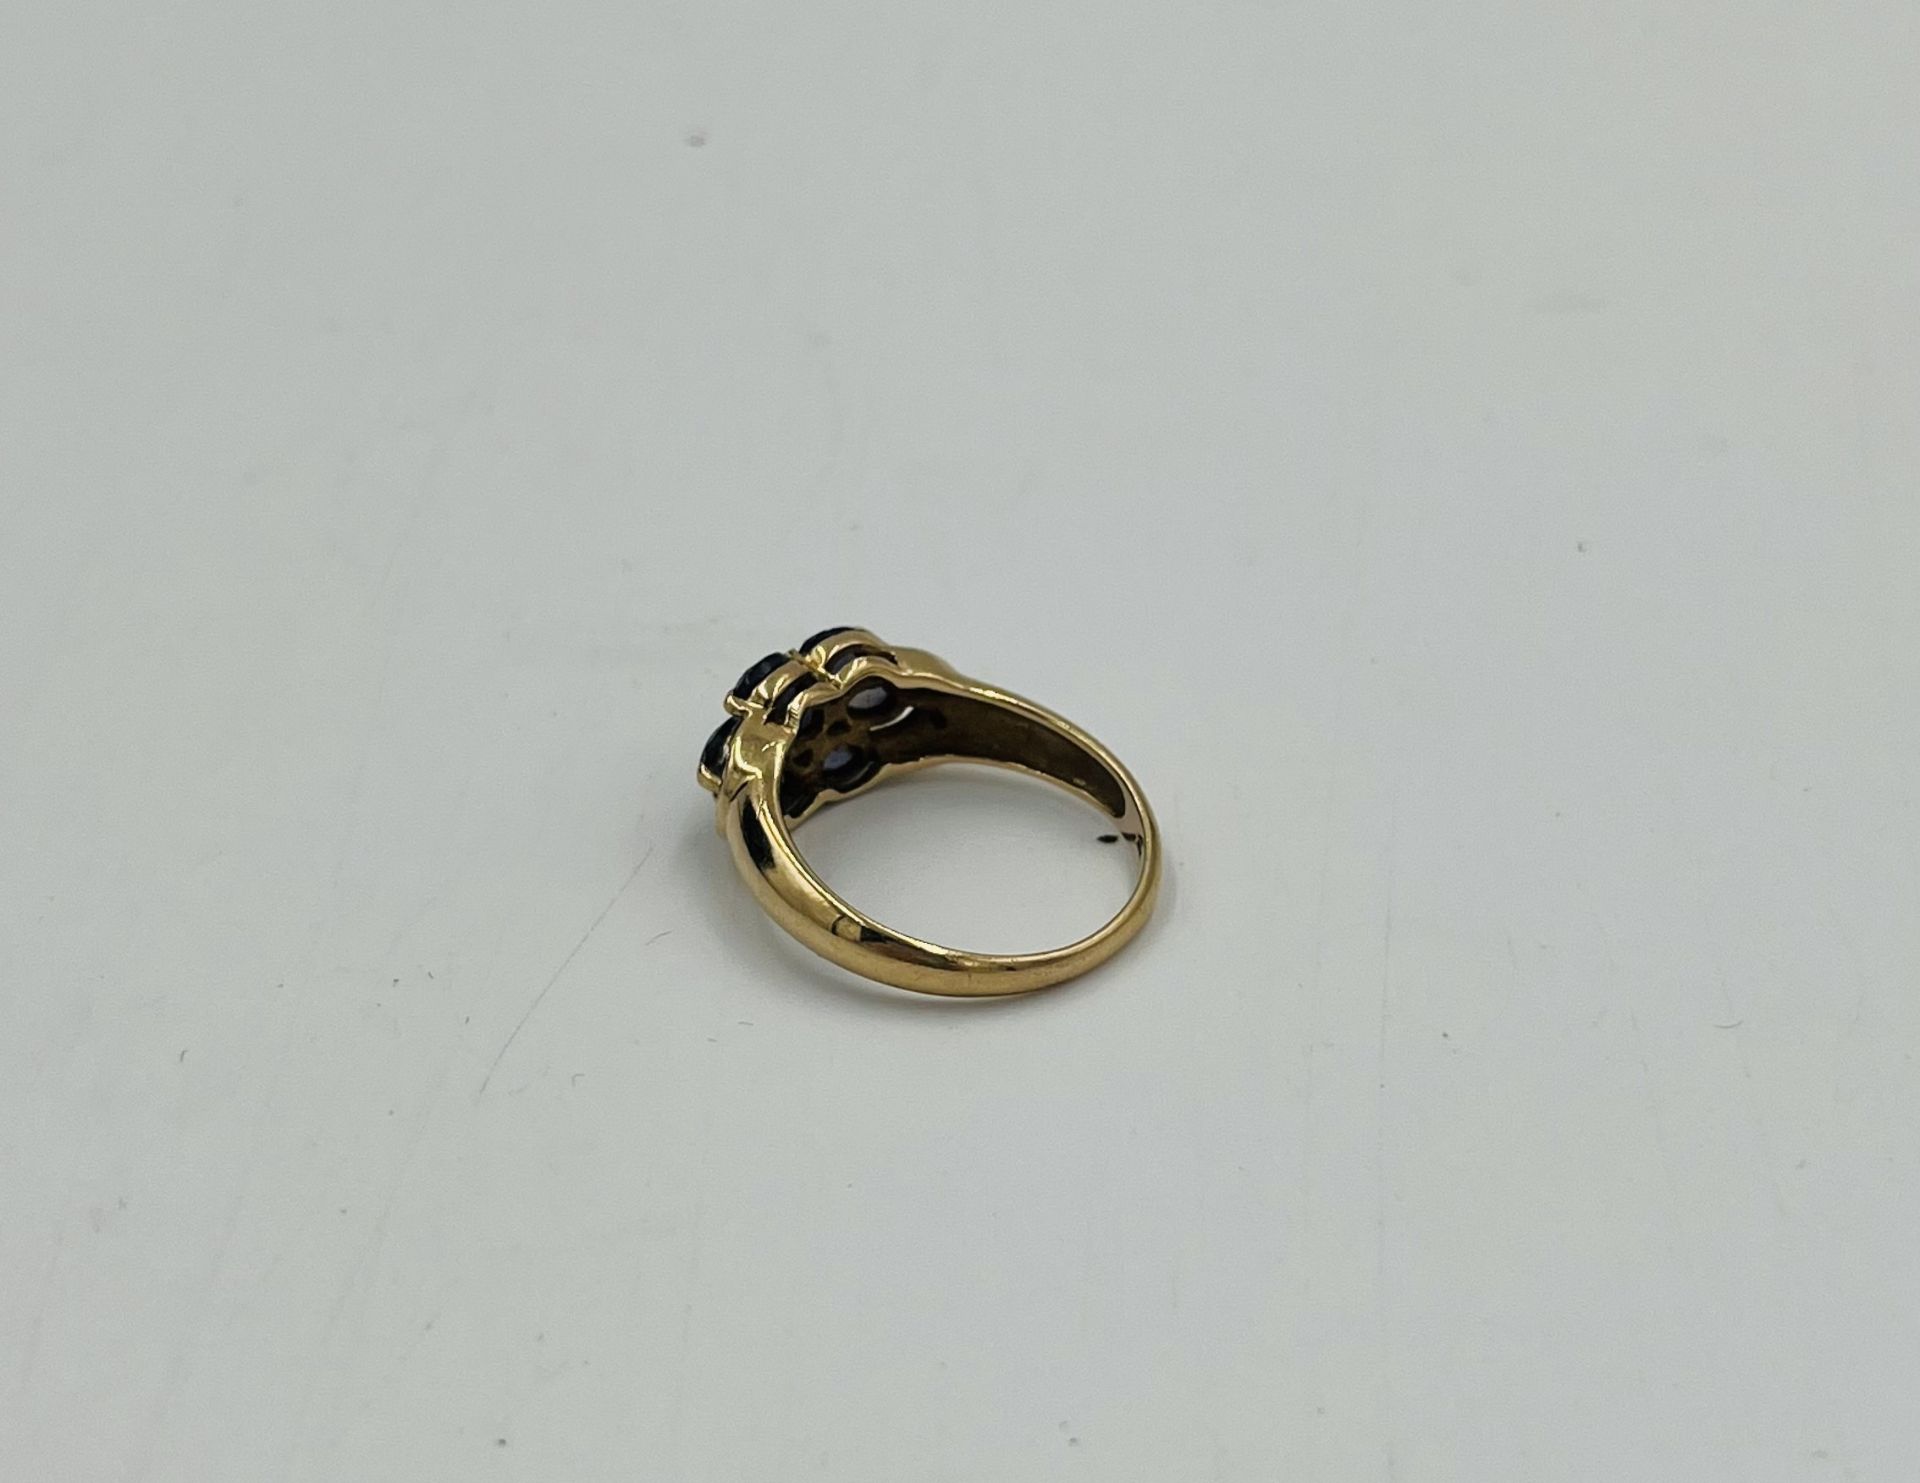 9ct gold ring set with an amethyst - Image 3 of 4